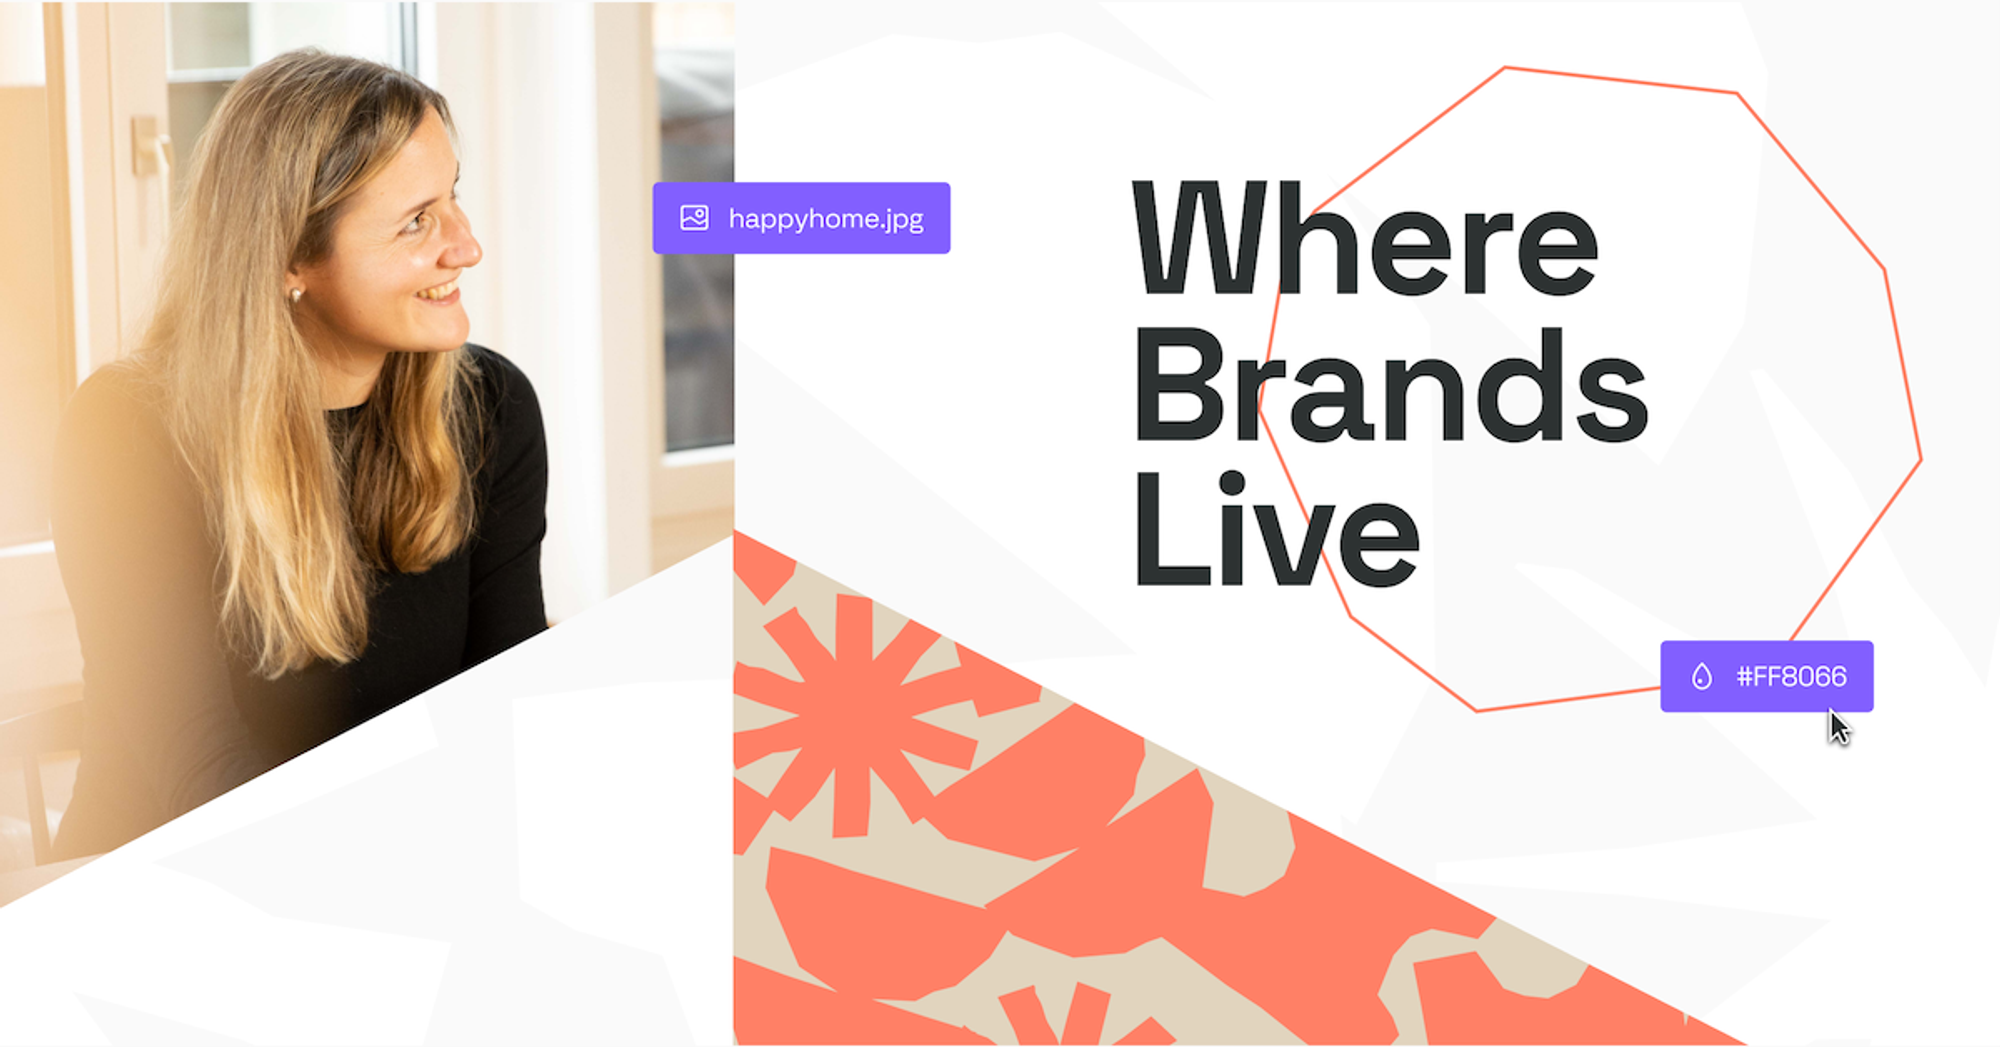 Frontify: Where Brands Live - Brand Management Software